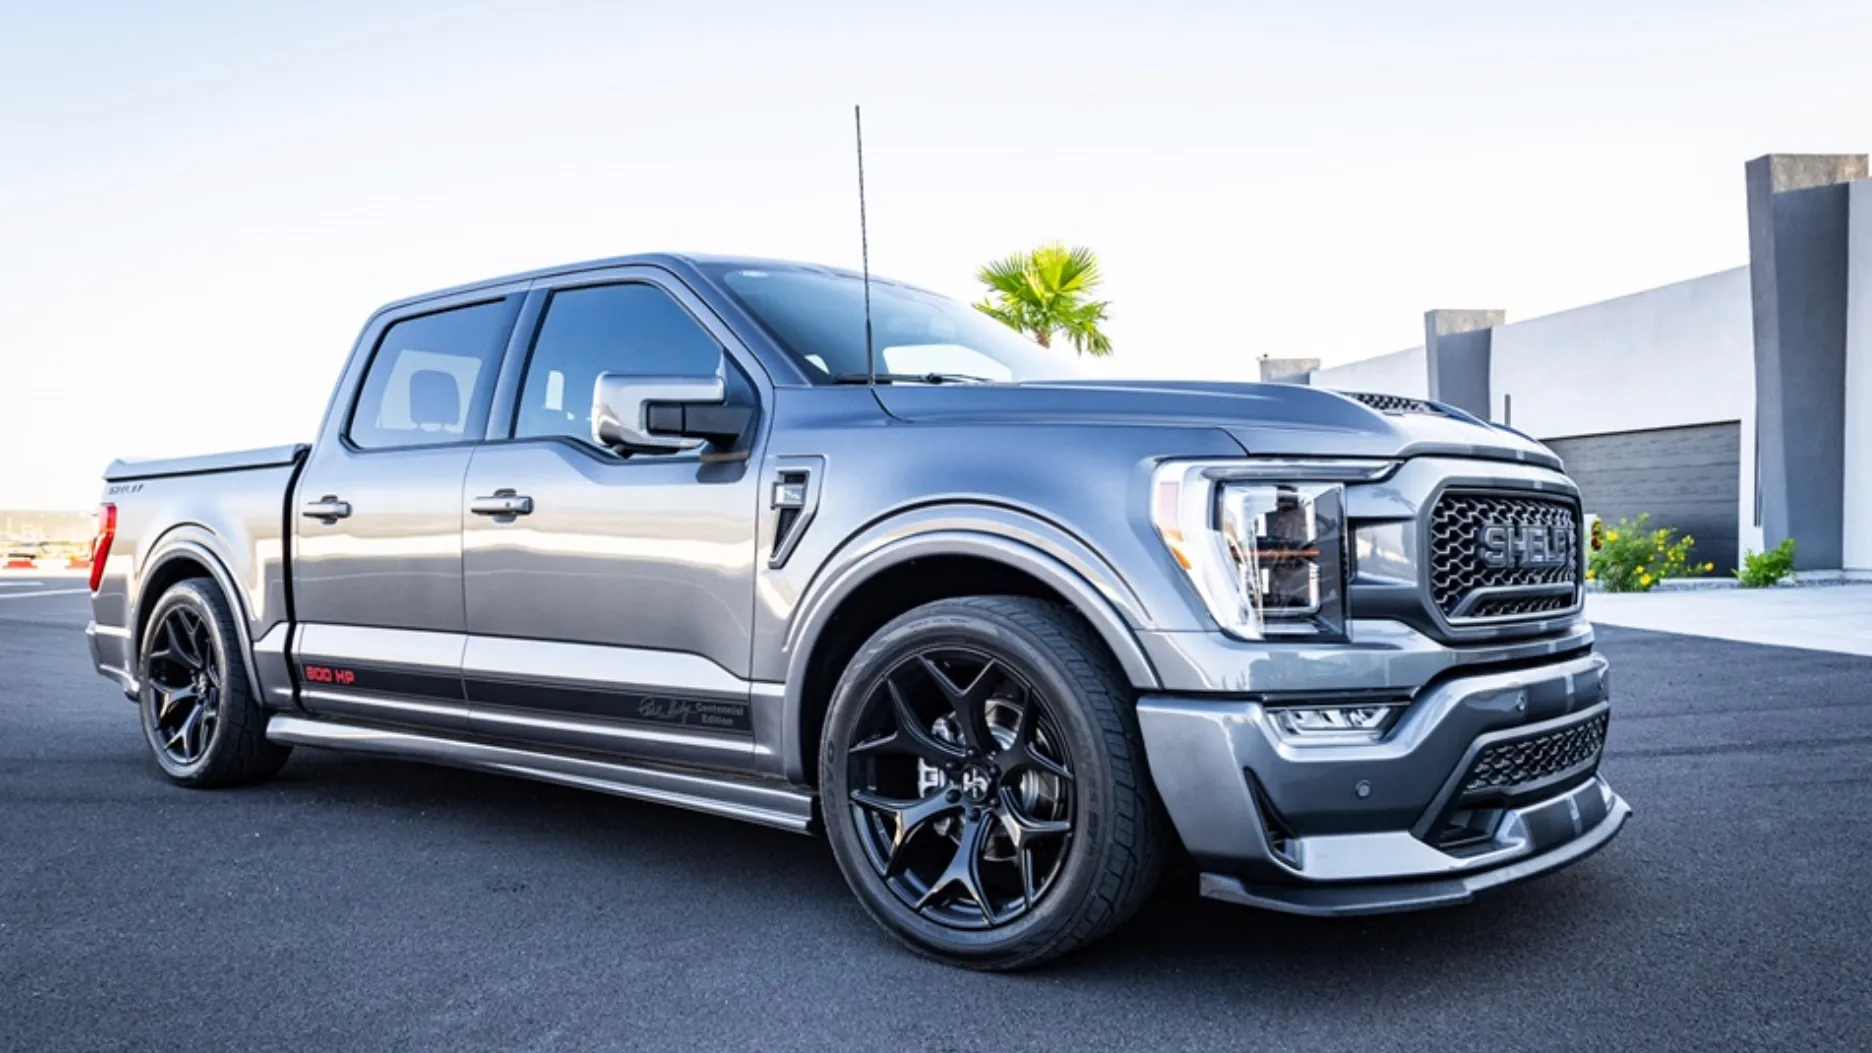 Centennial Edition Ford Shelby F-150 Super Snake pushes 800 hp for $136,995 Auto Recent